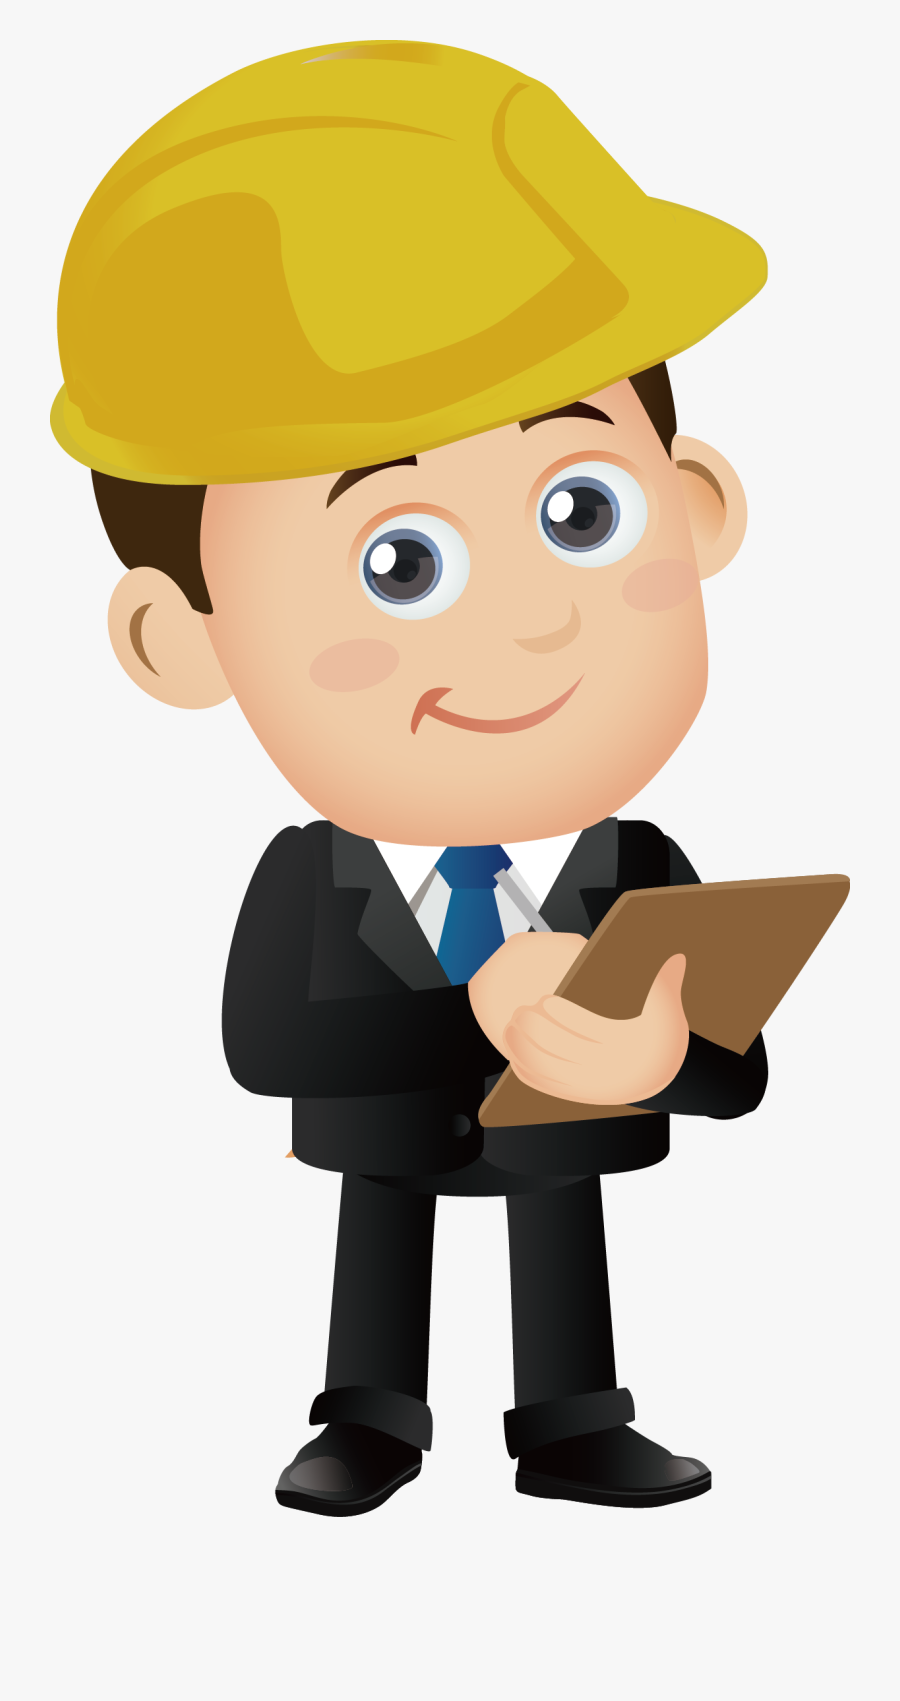 Engineer Clipart Civil - Engineer Clipart Png, Transparent Clipart